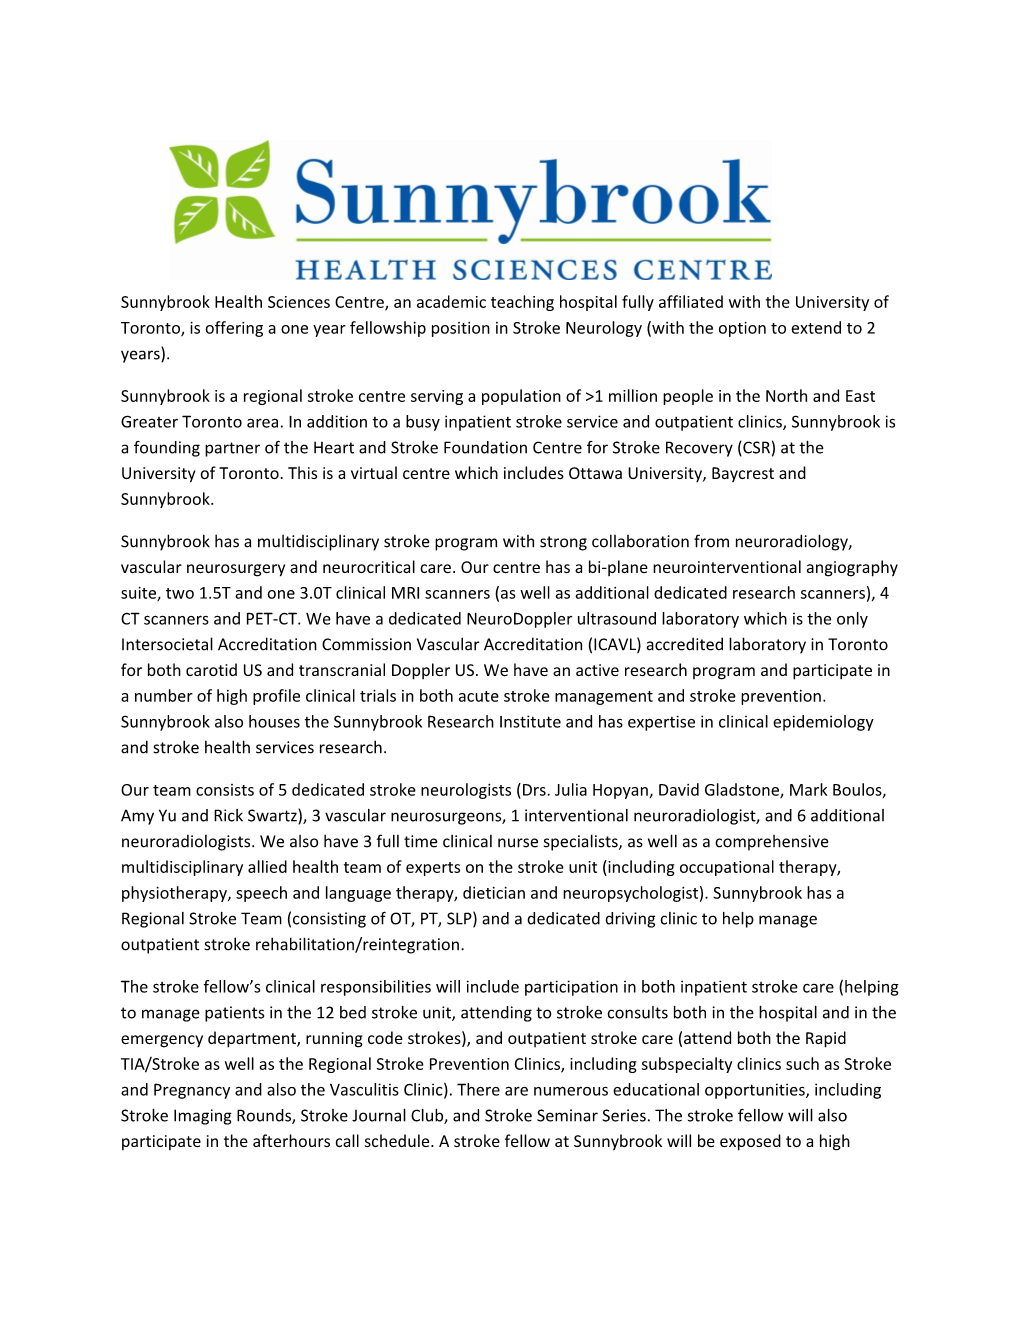 Sunnybrook Health Sciences Centre, an Academic Teaching Hospital Fully Affiliated With